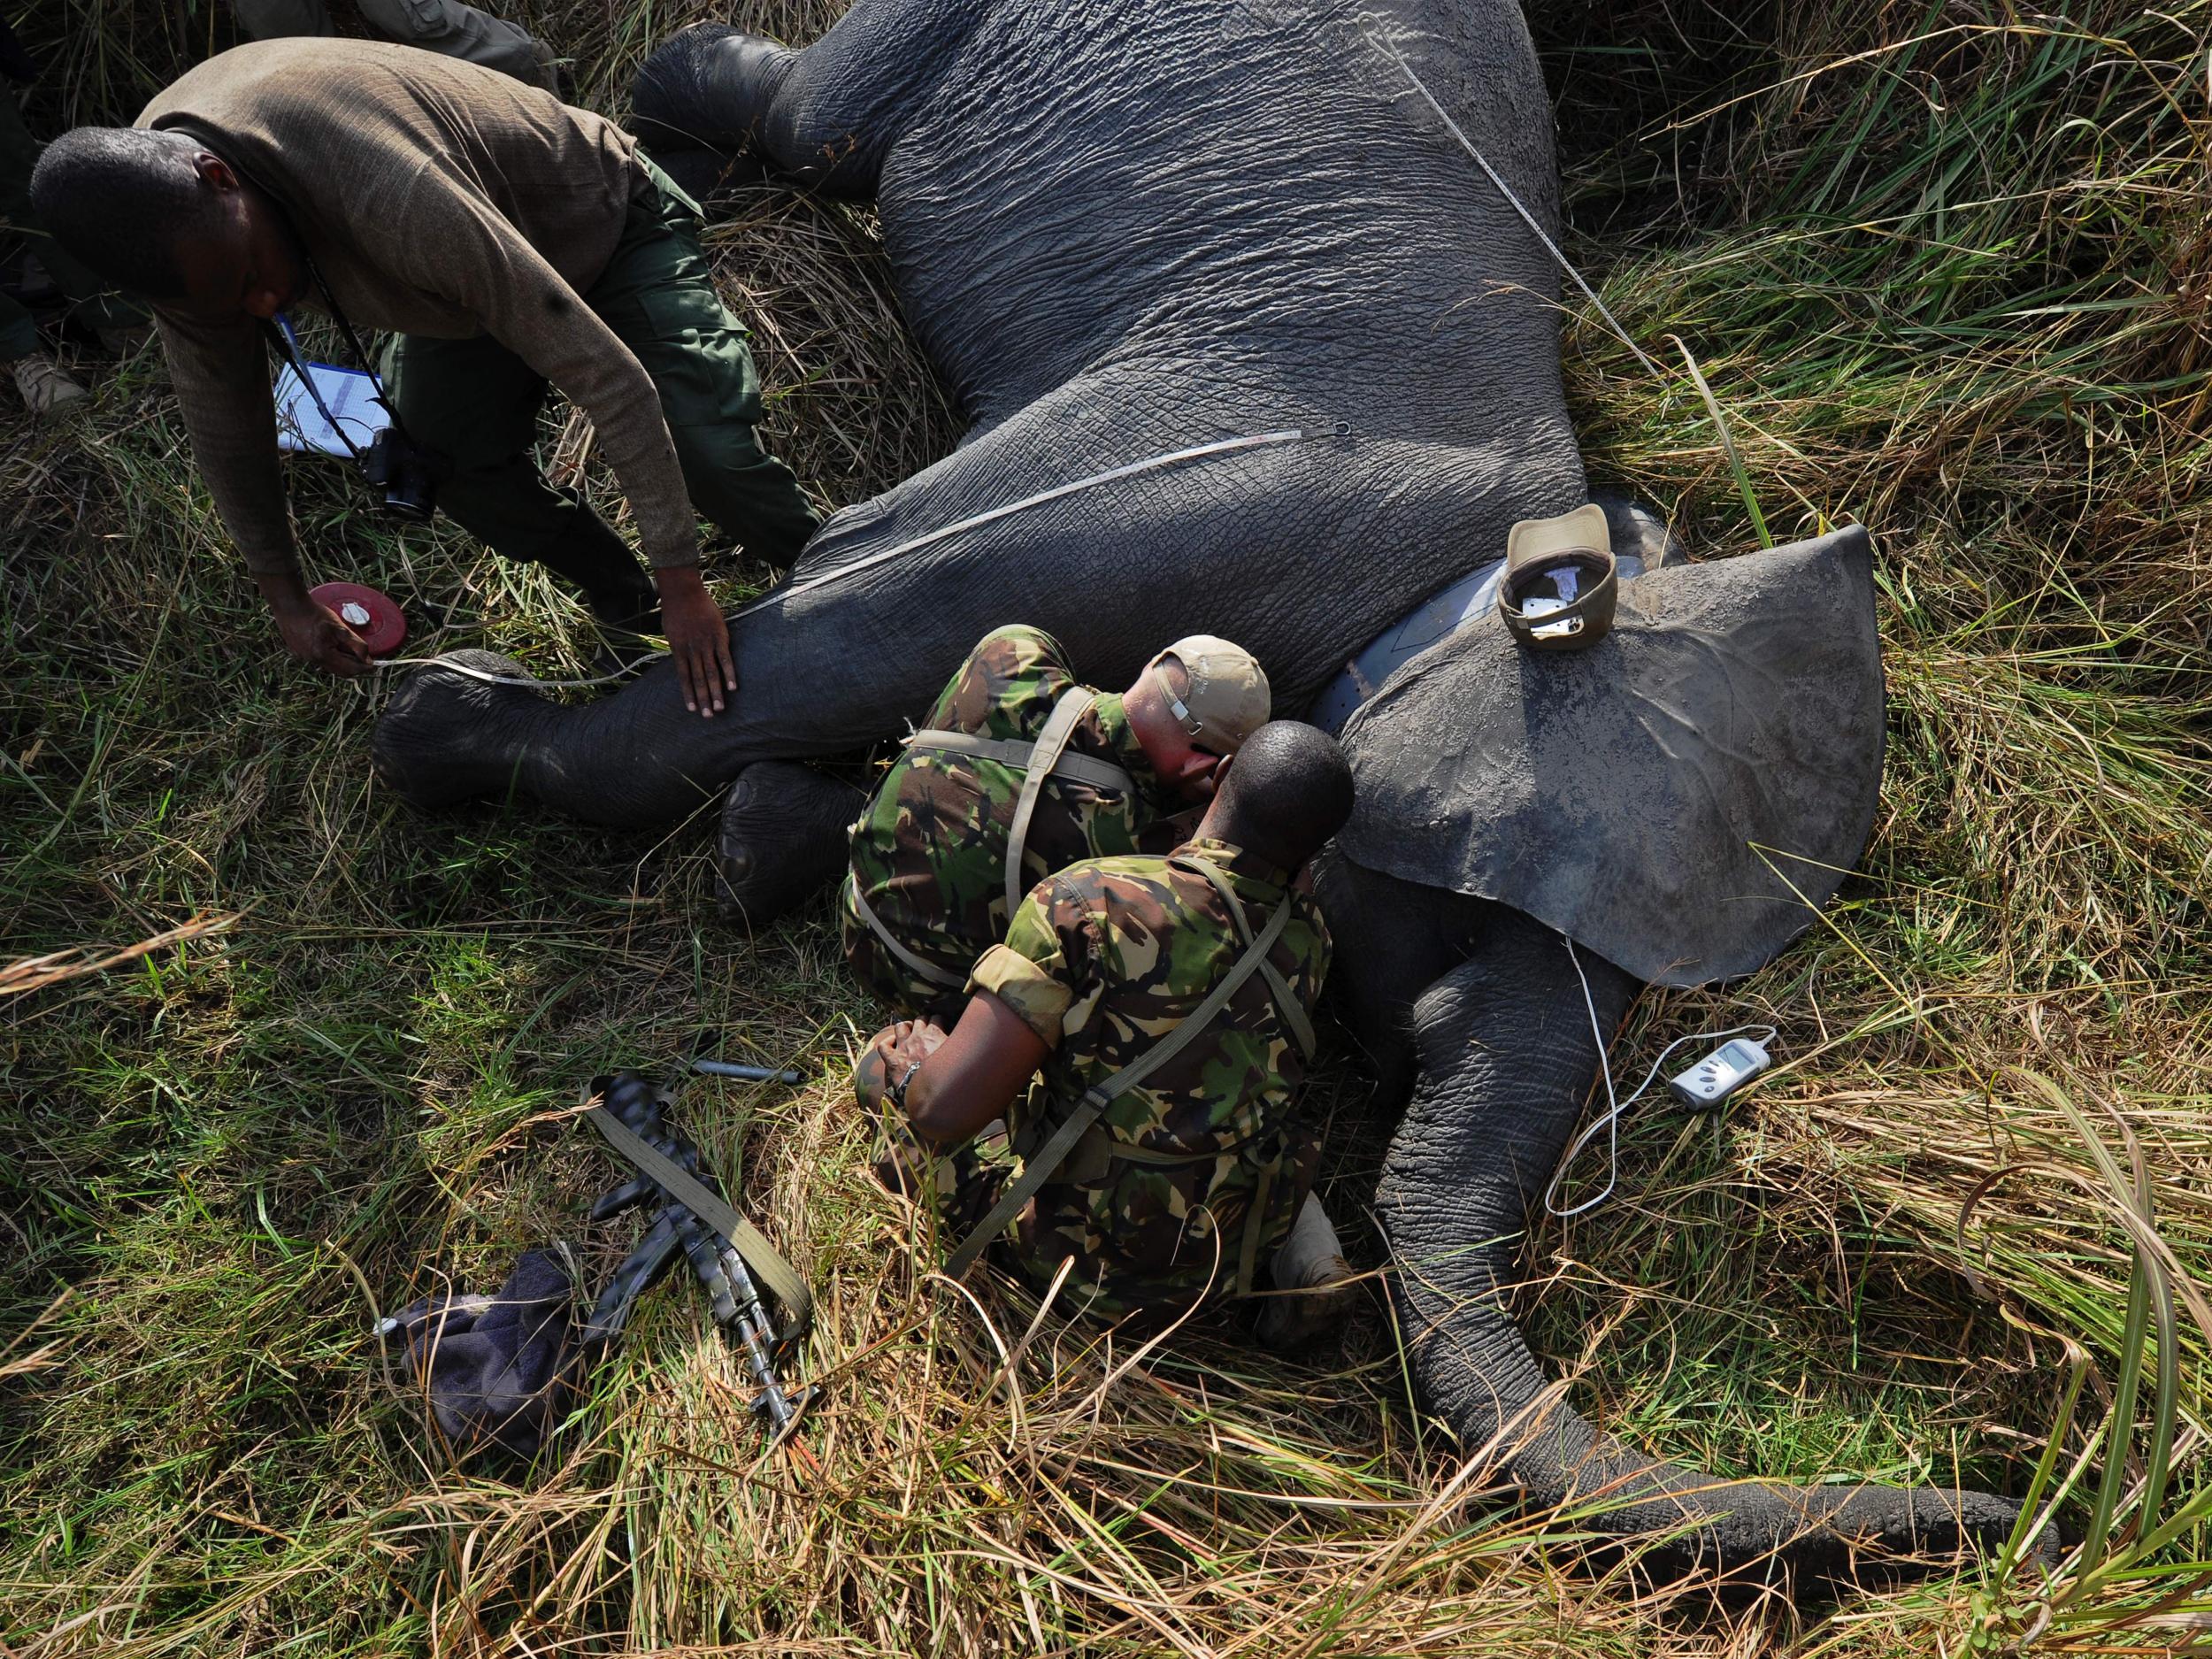 Elephants are at the centre of a fierce war between poaching gangs and rangers